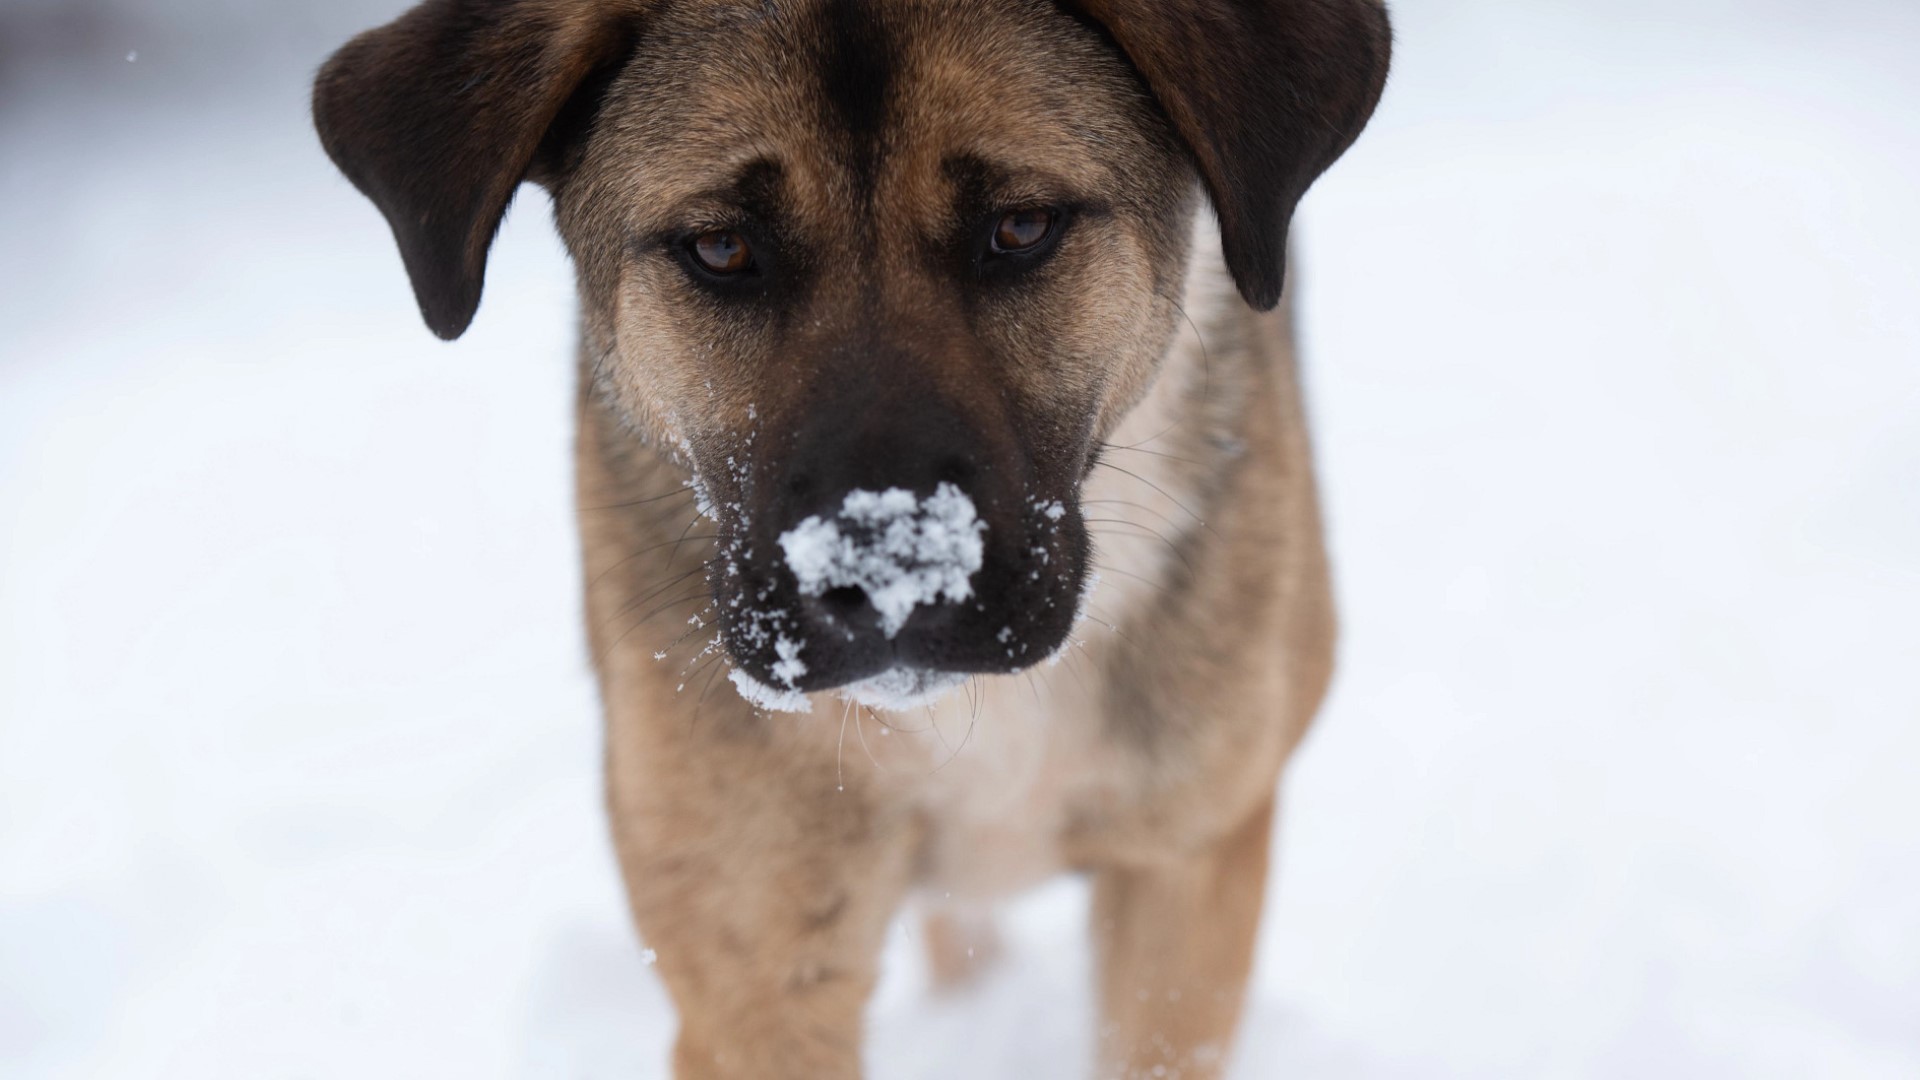 Cold weather can be uncomfortable for people, but for animals, especially small ones, the cold can be life-threatening.